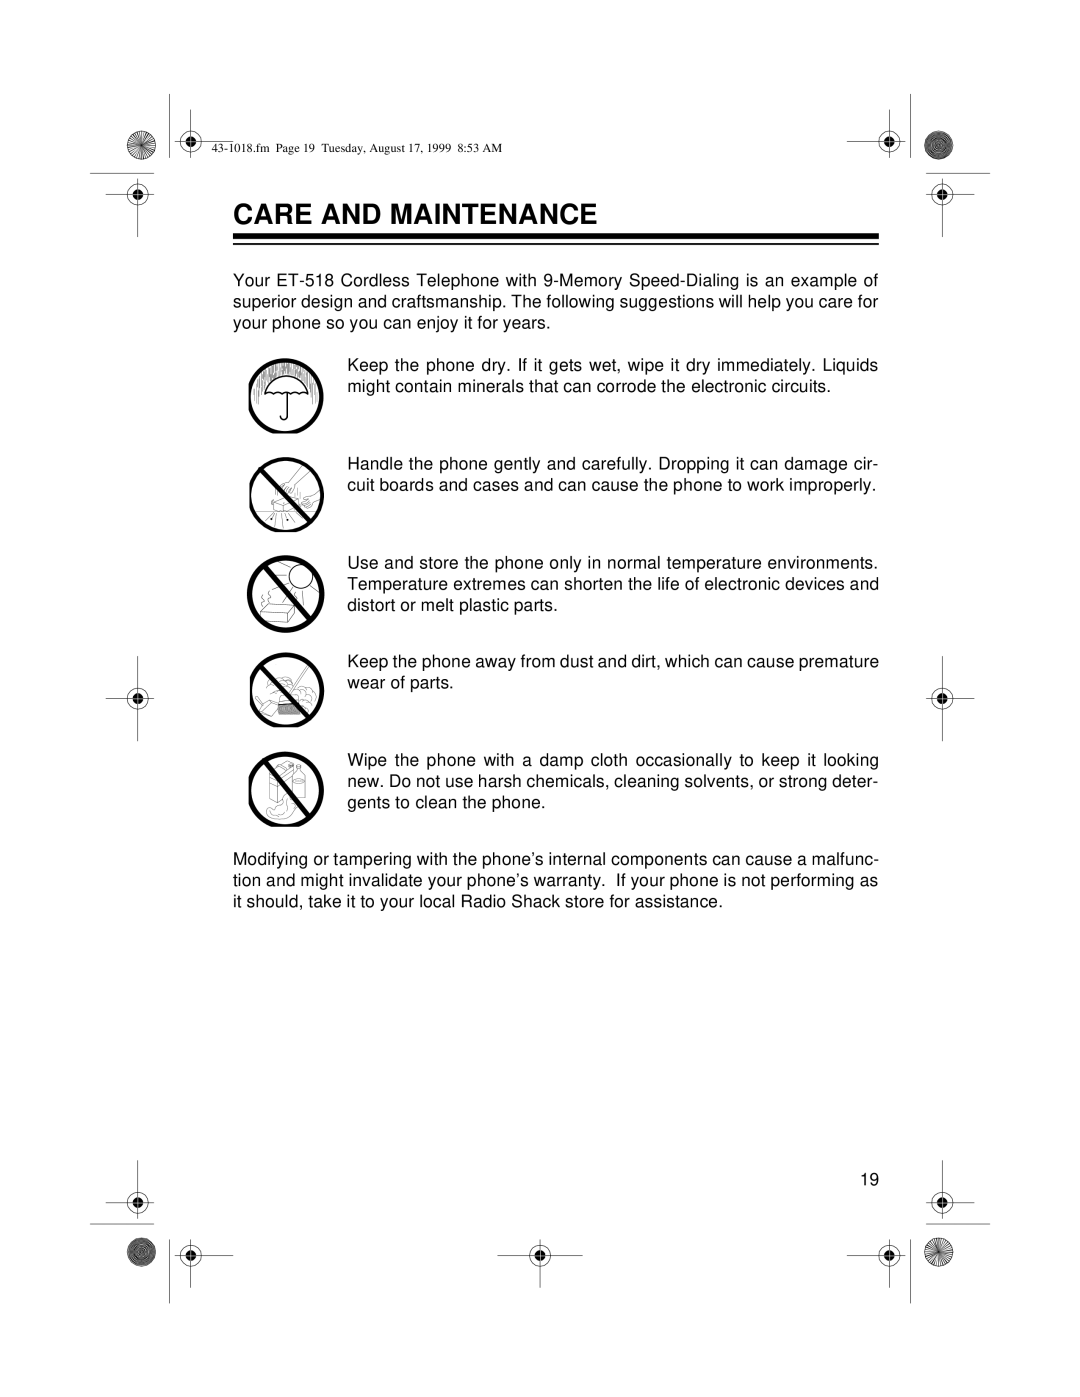 Radio Shack ET-518 owner manual Care And Maintenance, fm Page 19 Tuesday, August 17, 1999 853 AM 